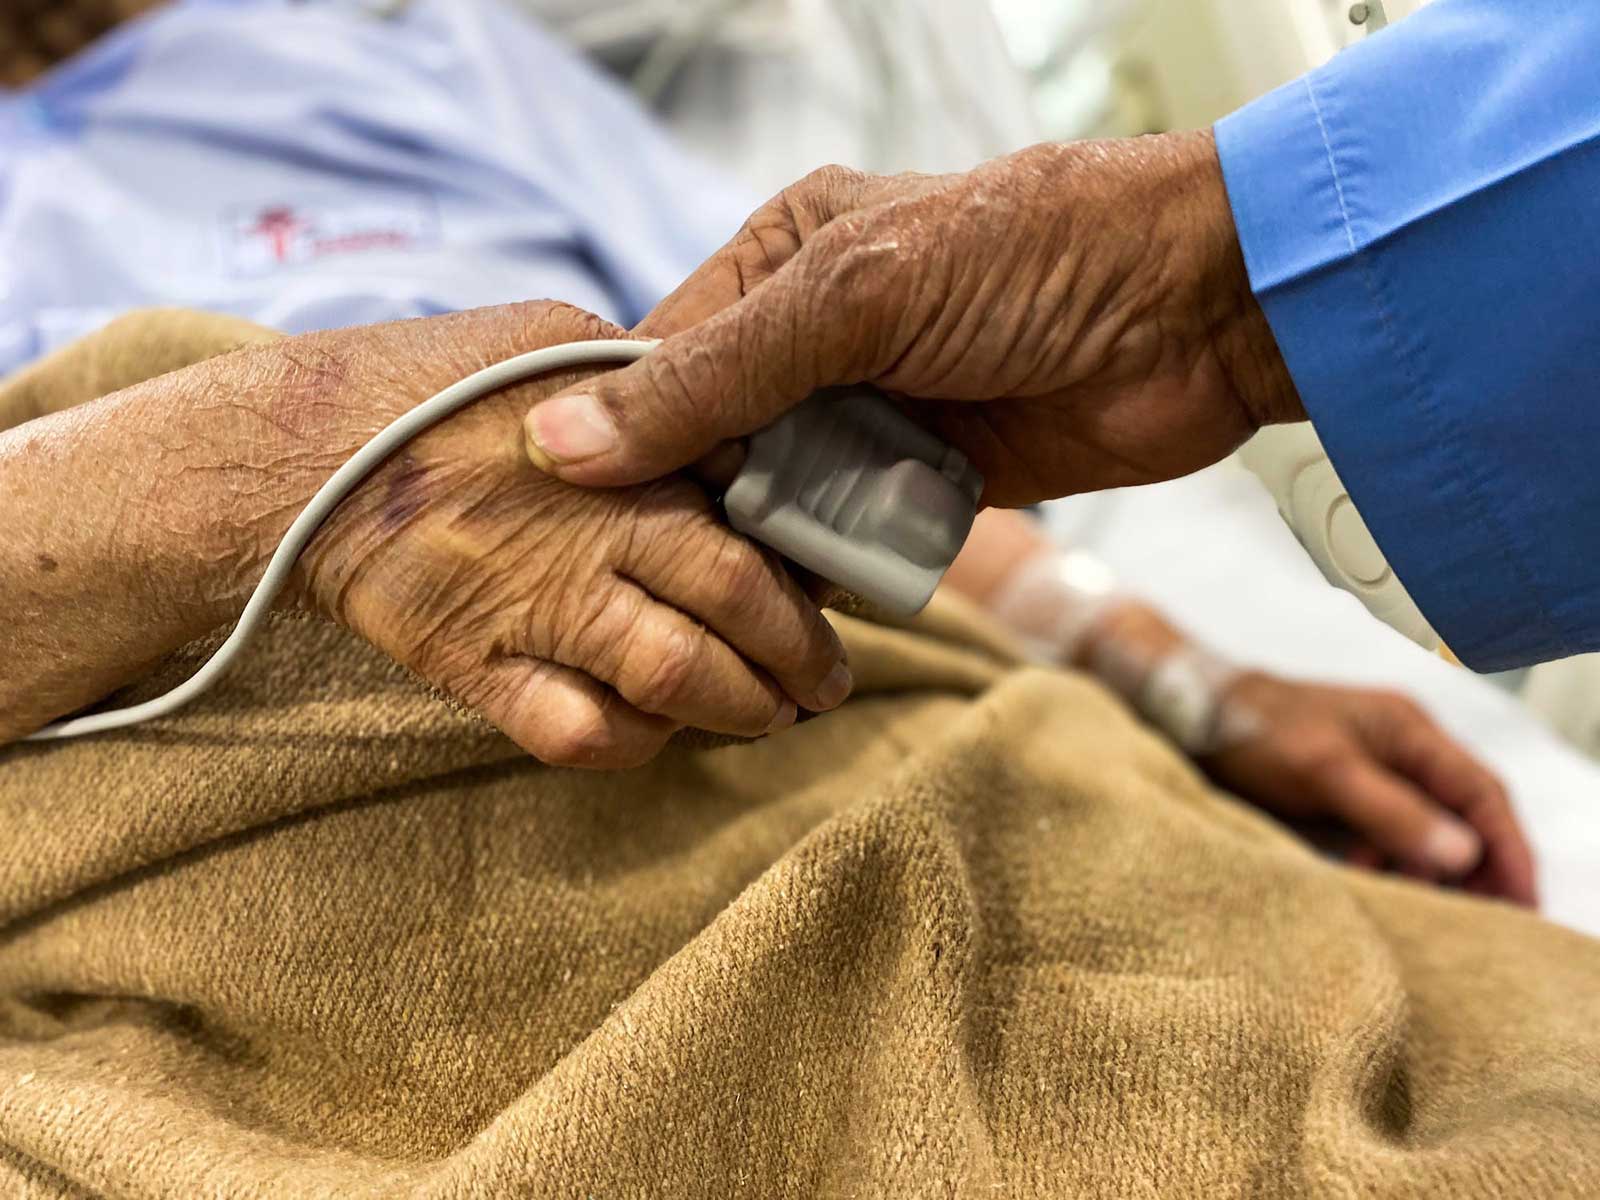 Elderly hand with a pulse oximeter being held by another hand, in a nursing home